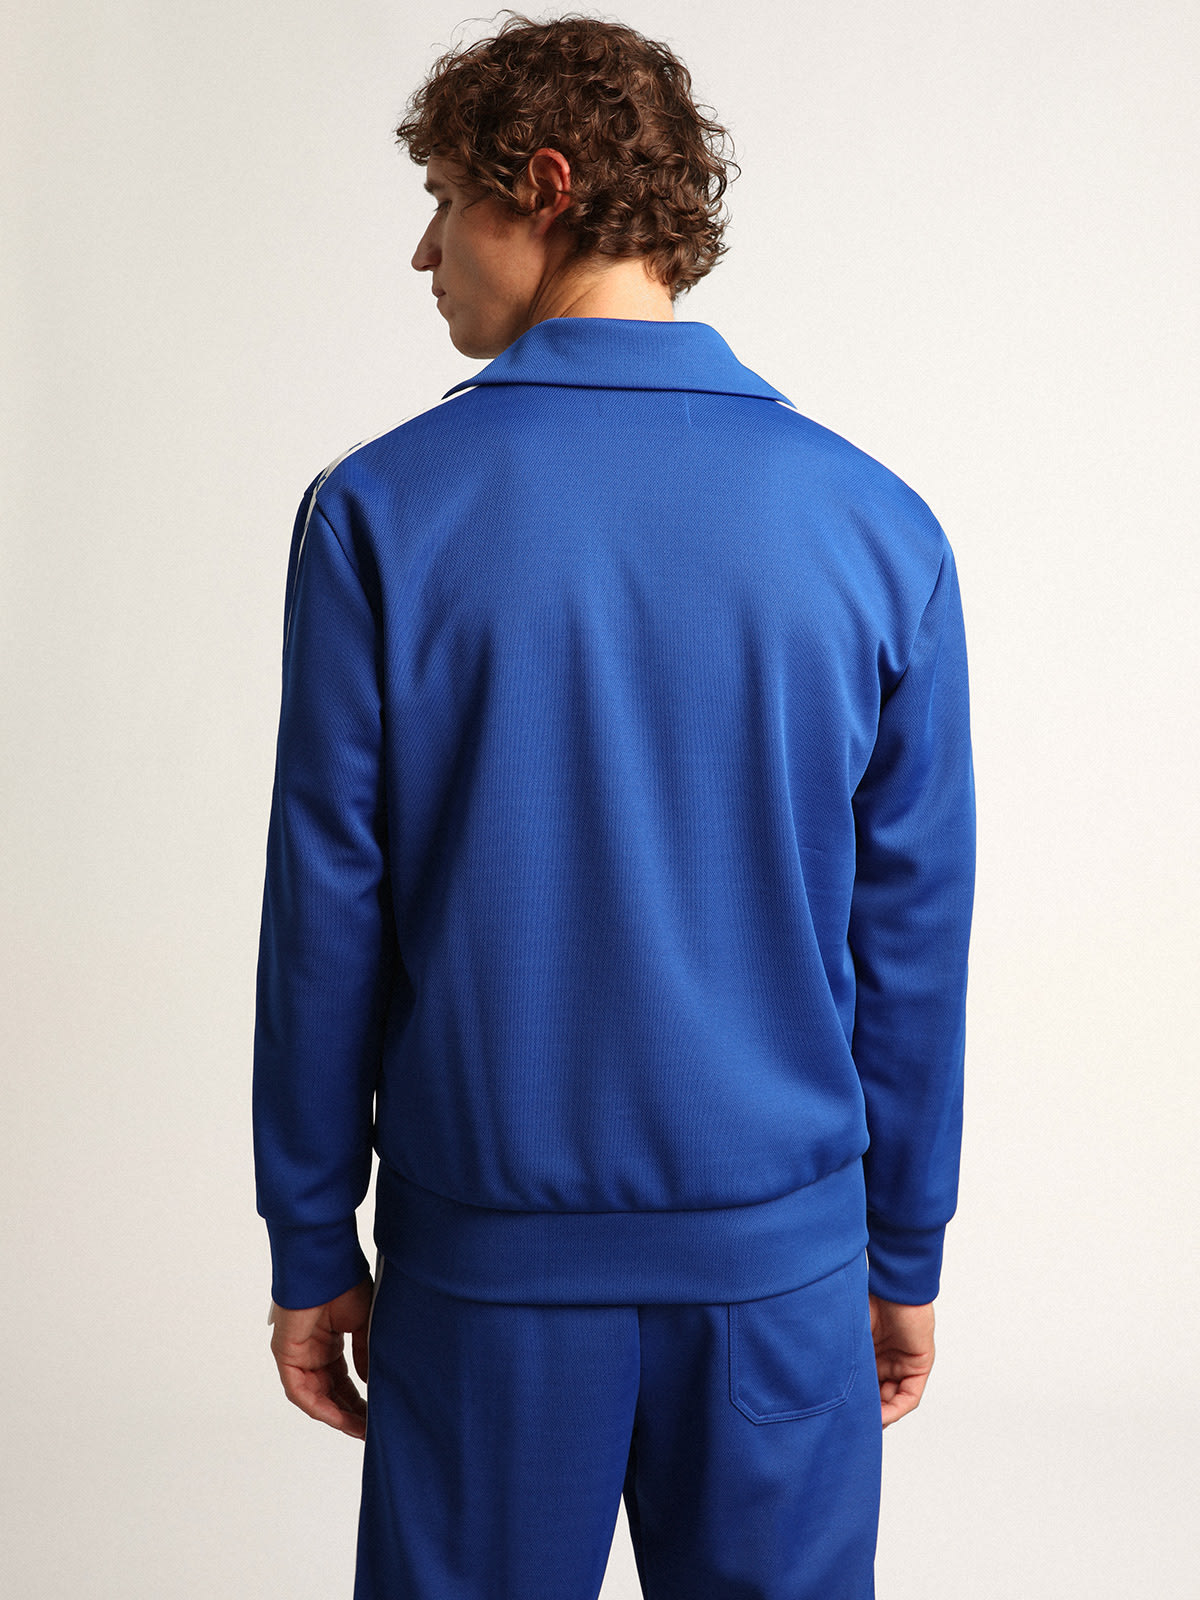 Golden Goose - Men's blue zipped sweatshirt with white strip and contrasting stars in 